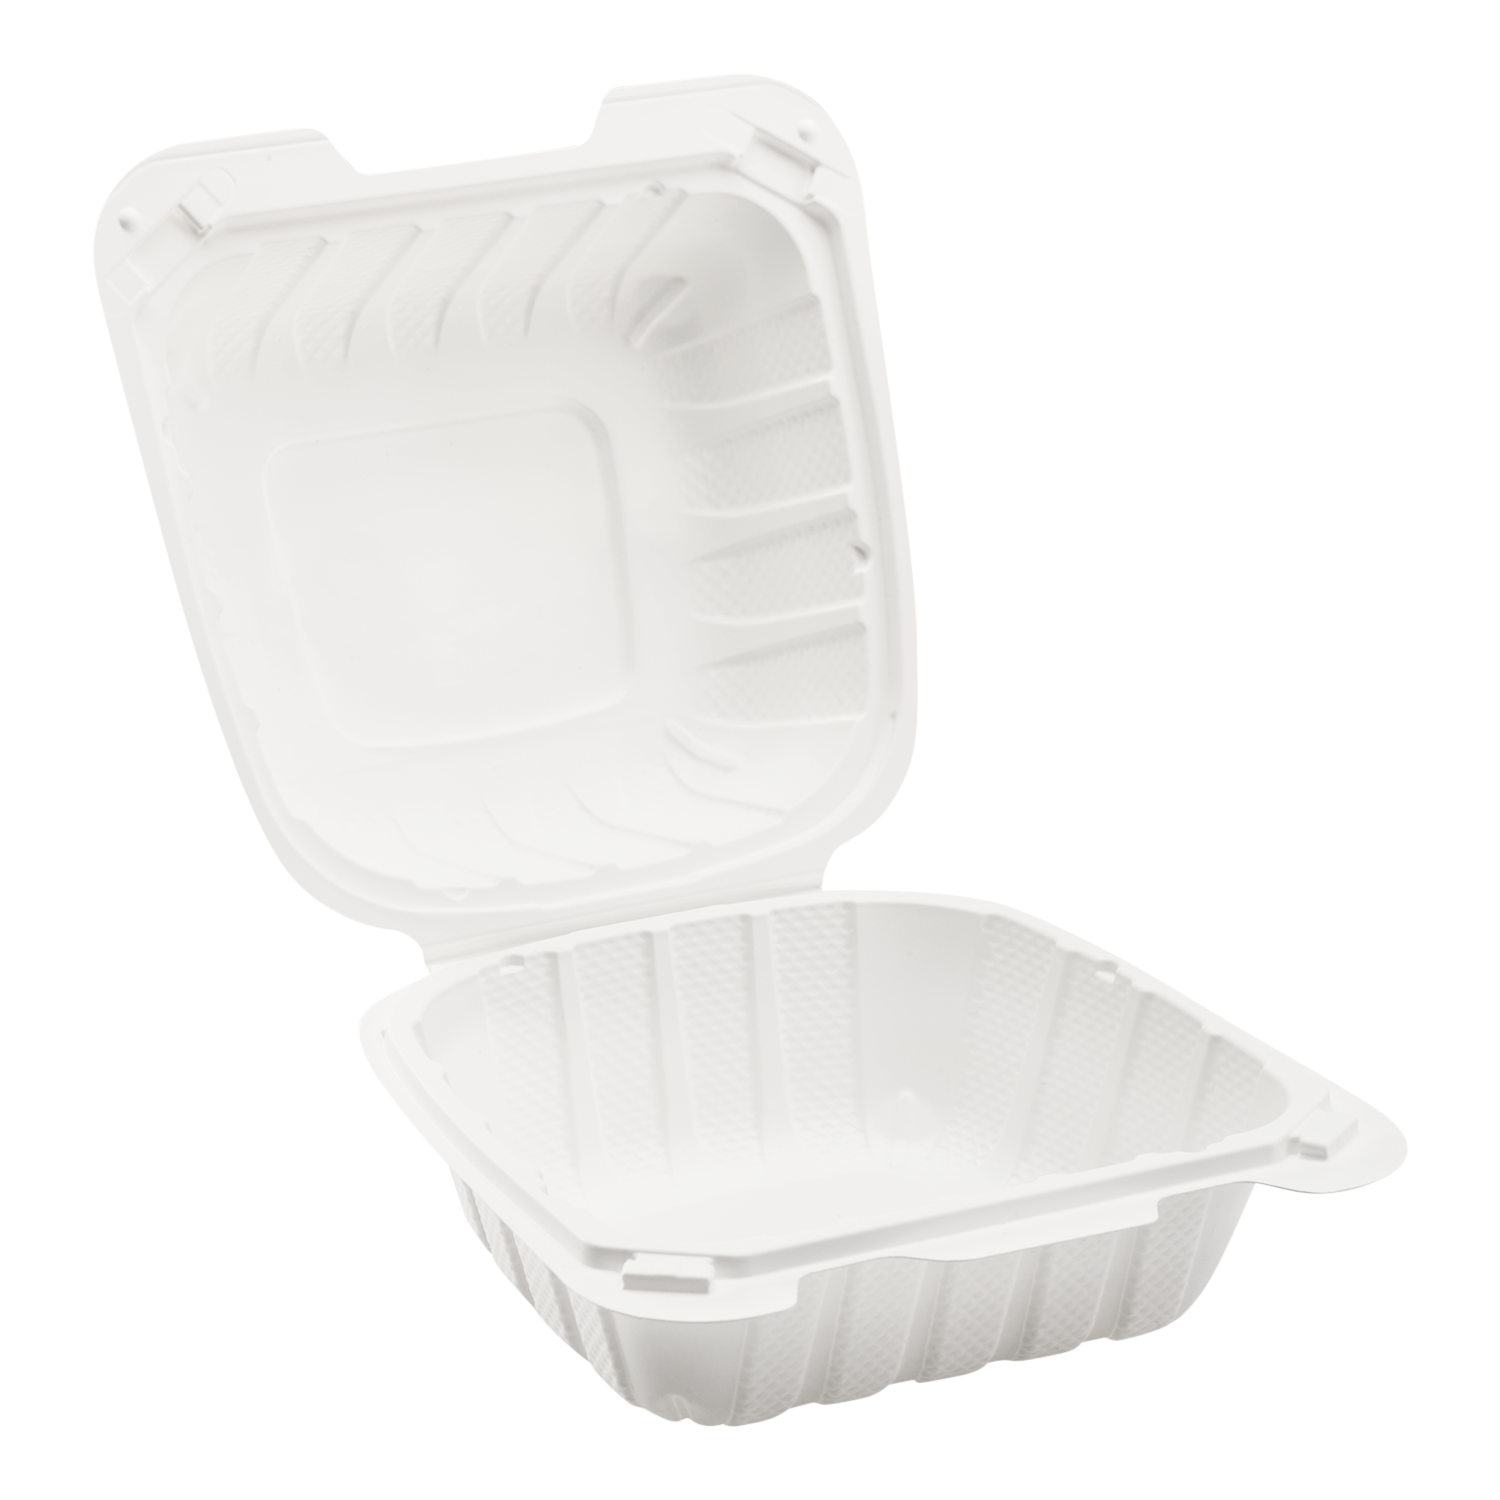  Glad Food Storage Containers, Standard Food Storage Containers  from Glad for Storing Meals, Snacks, and Desserts